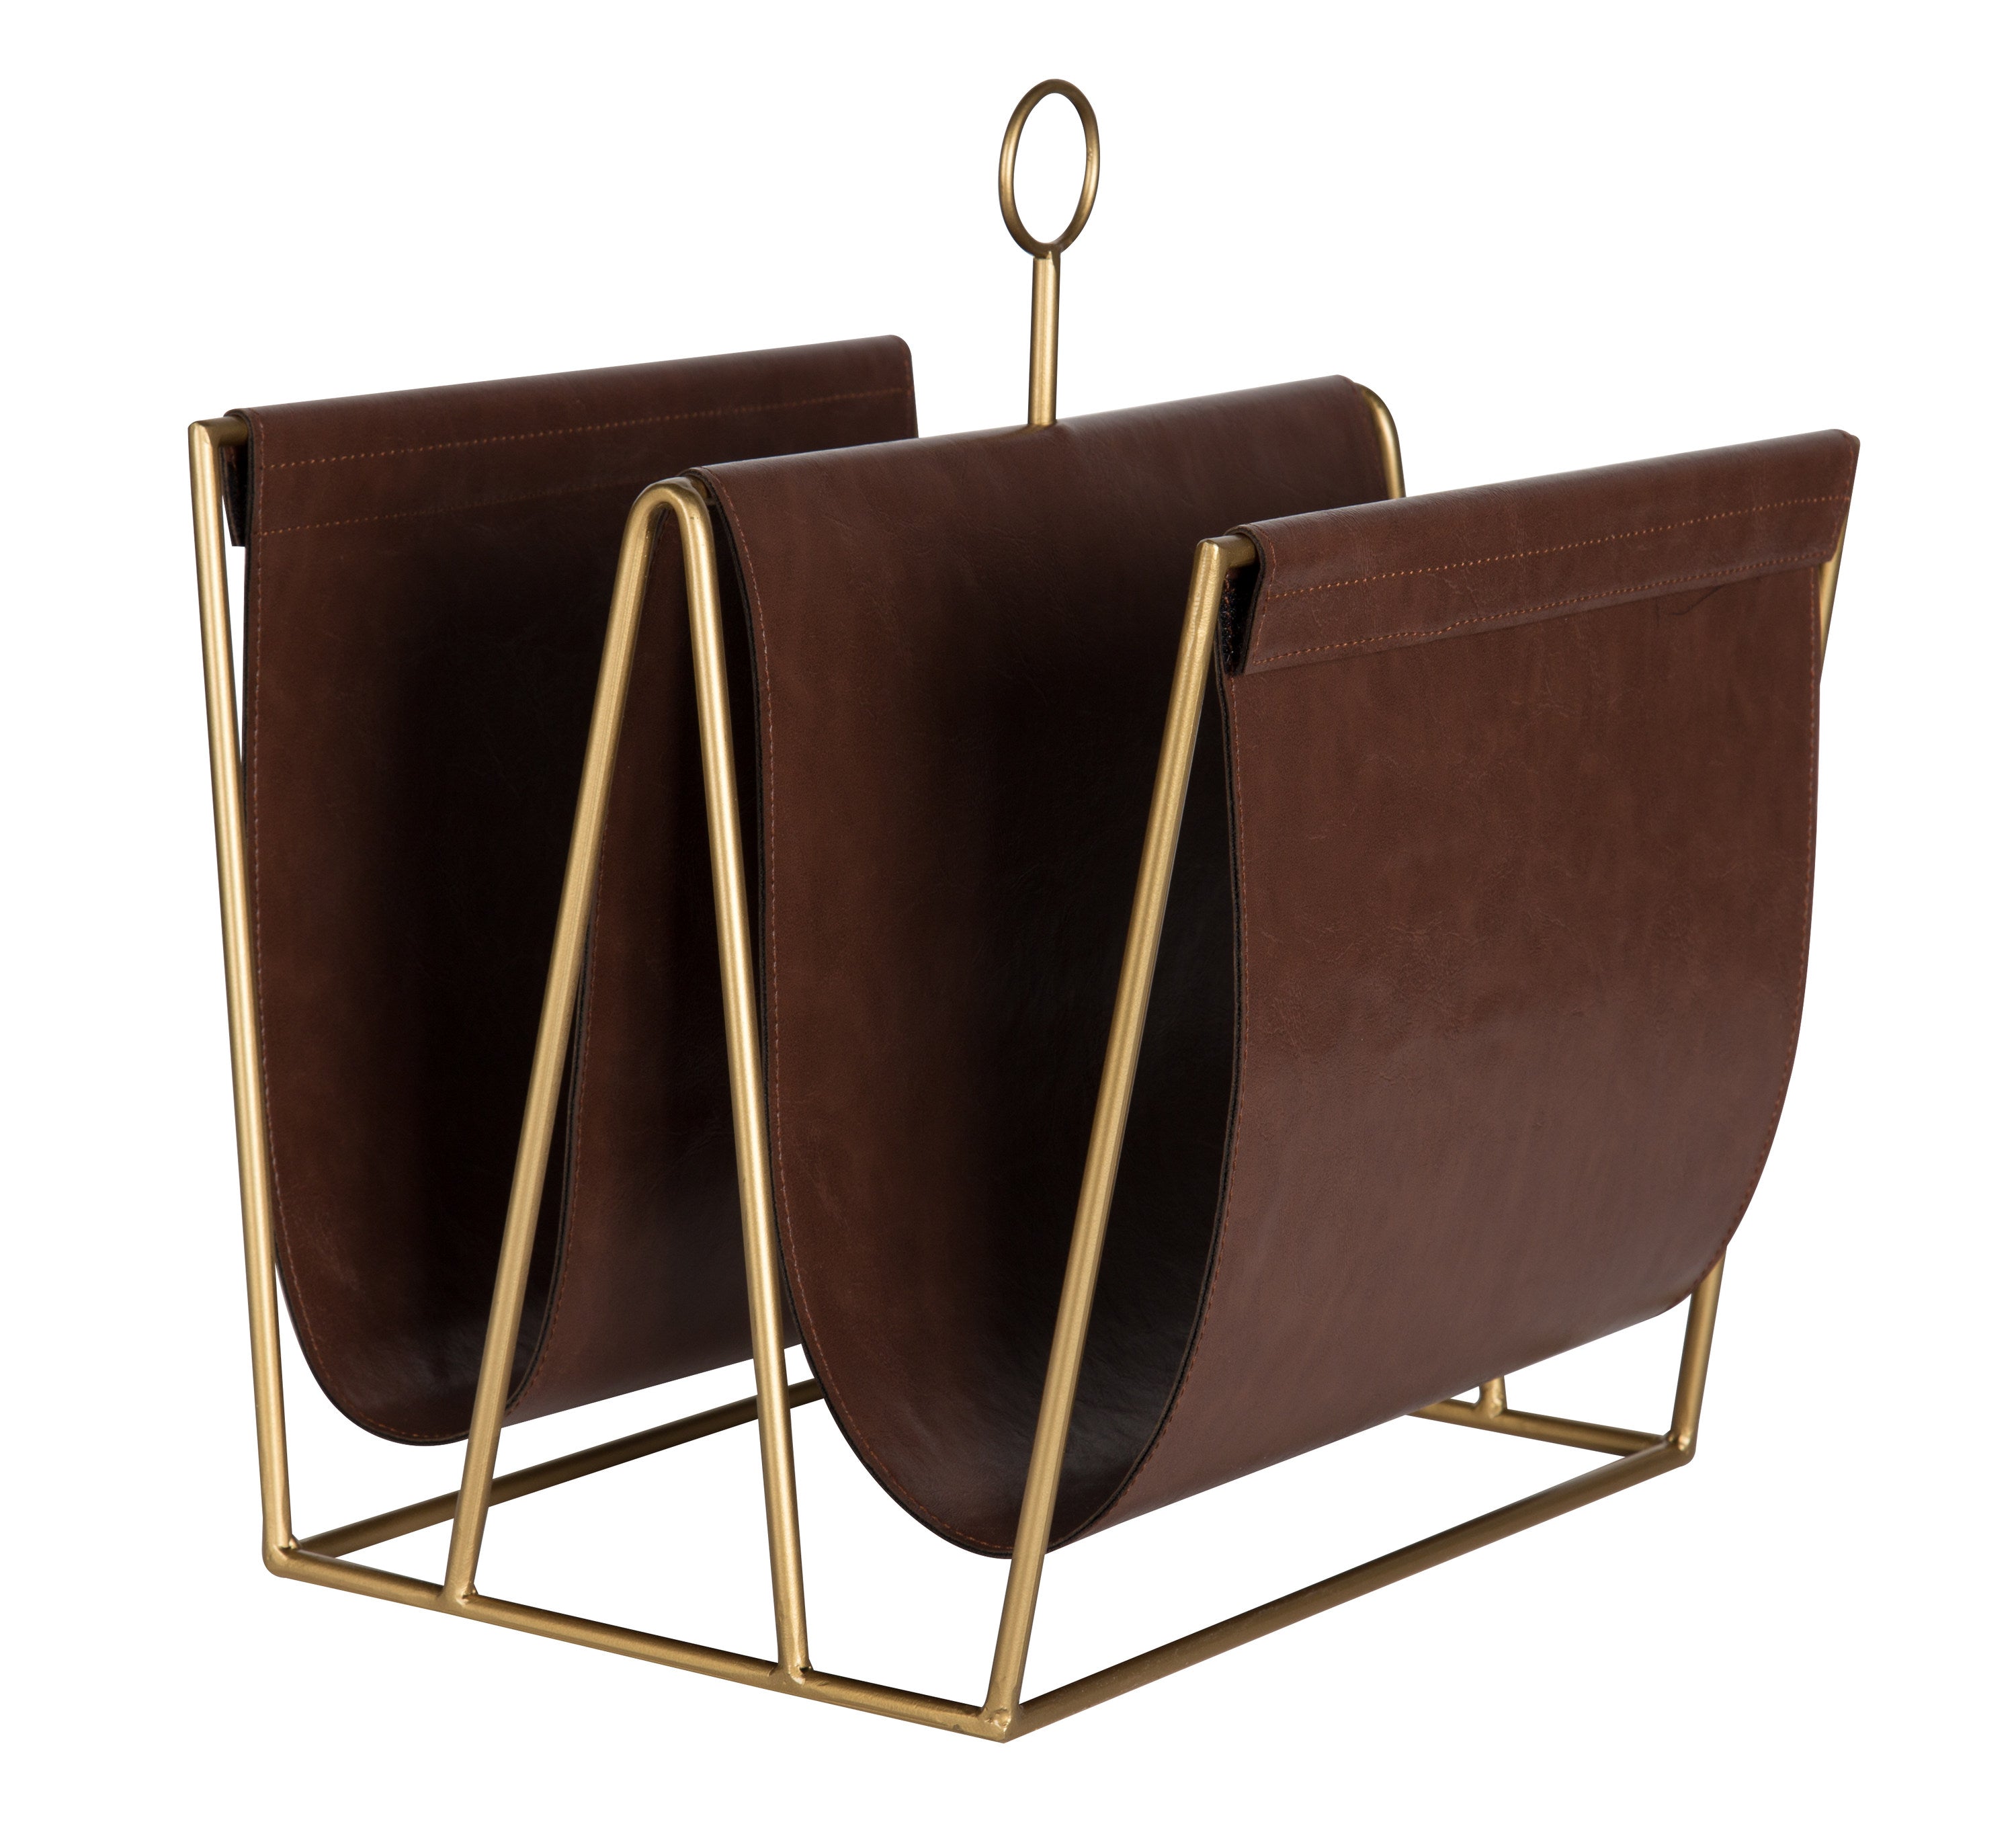 Alton Metal and Faux Leather Magazine File Holder